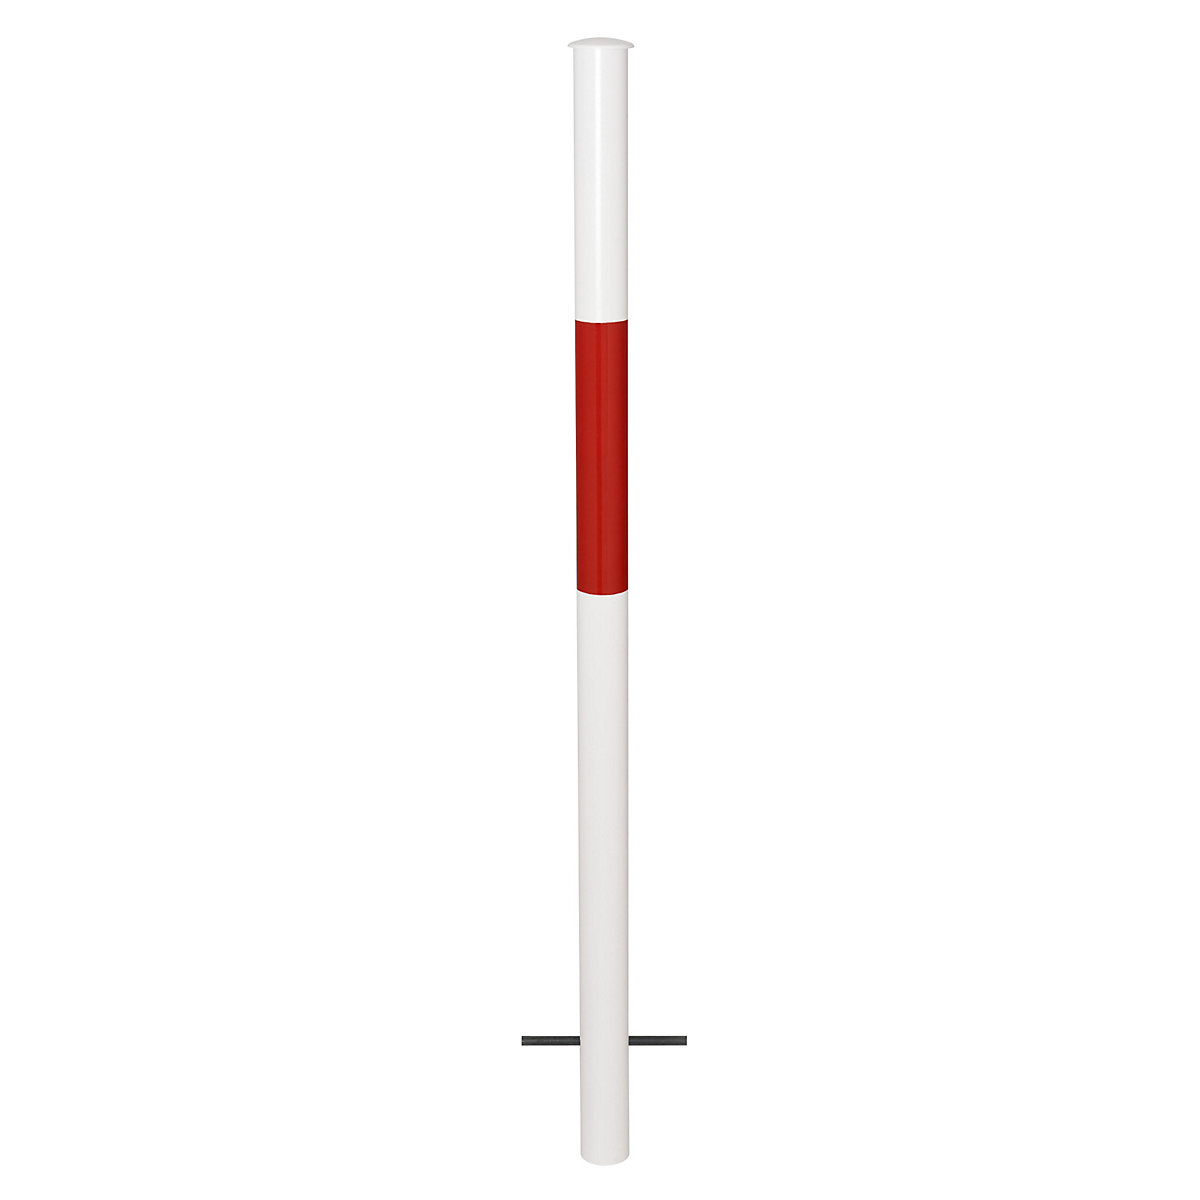 Railing system, upright for setting in concrete, red/white